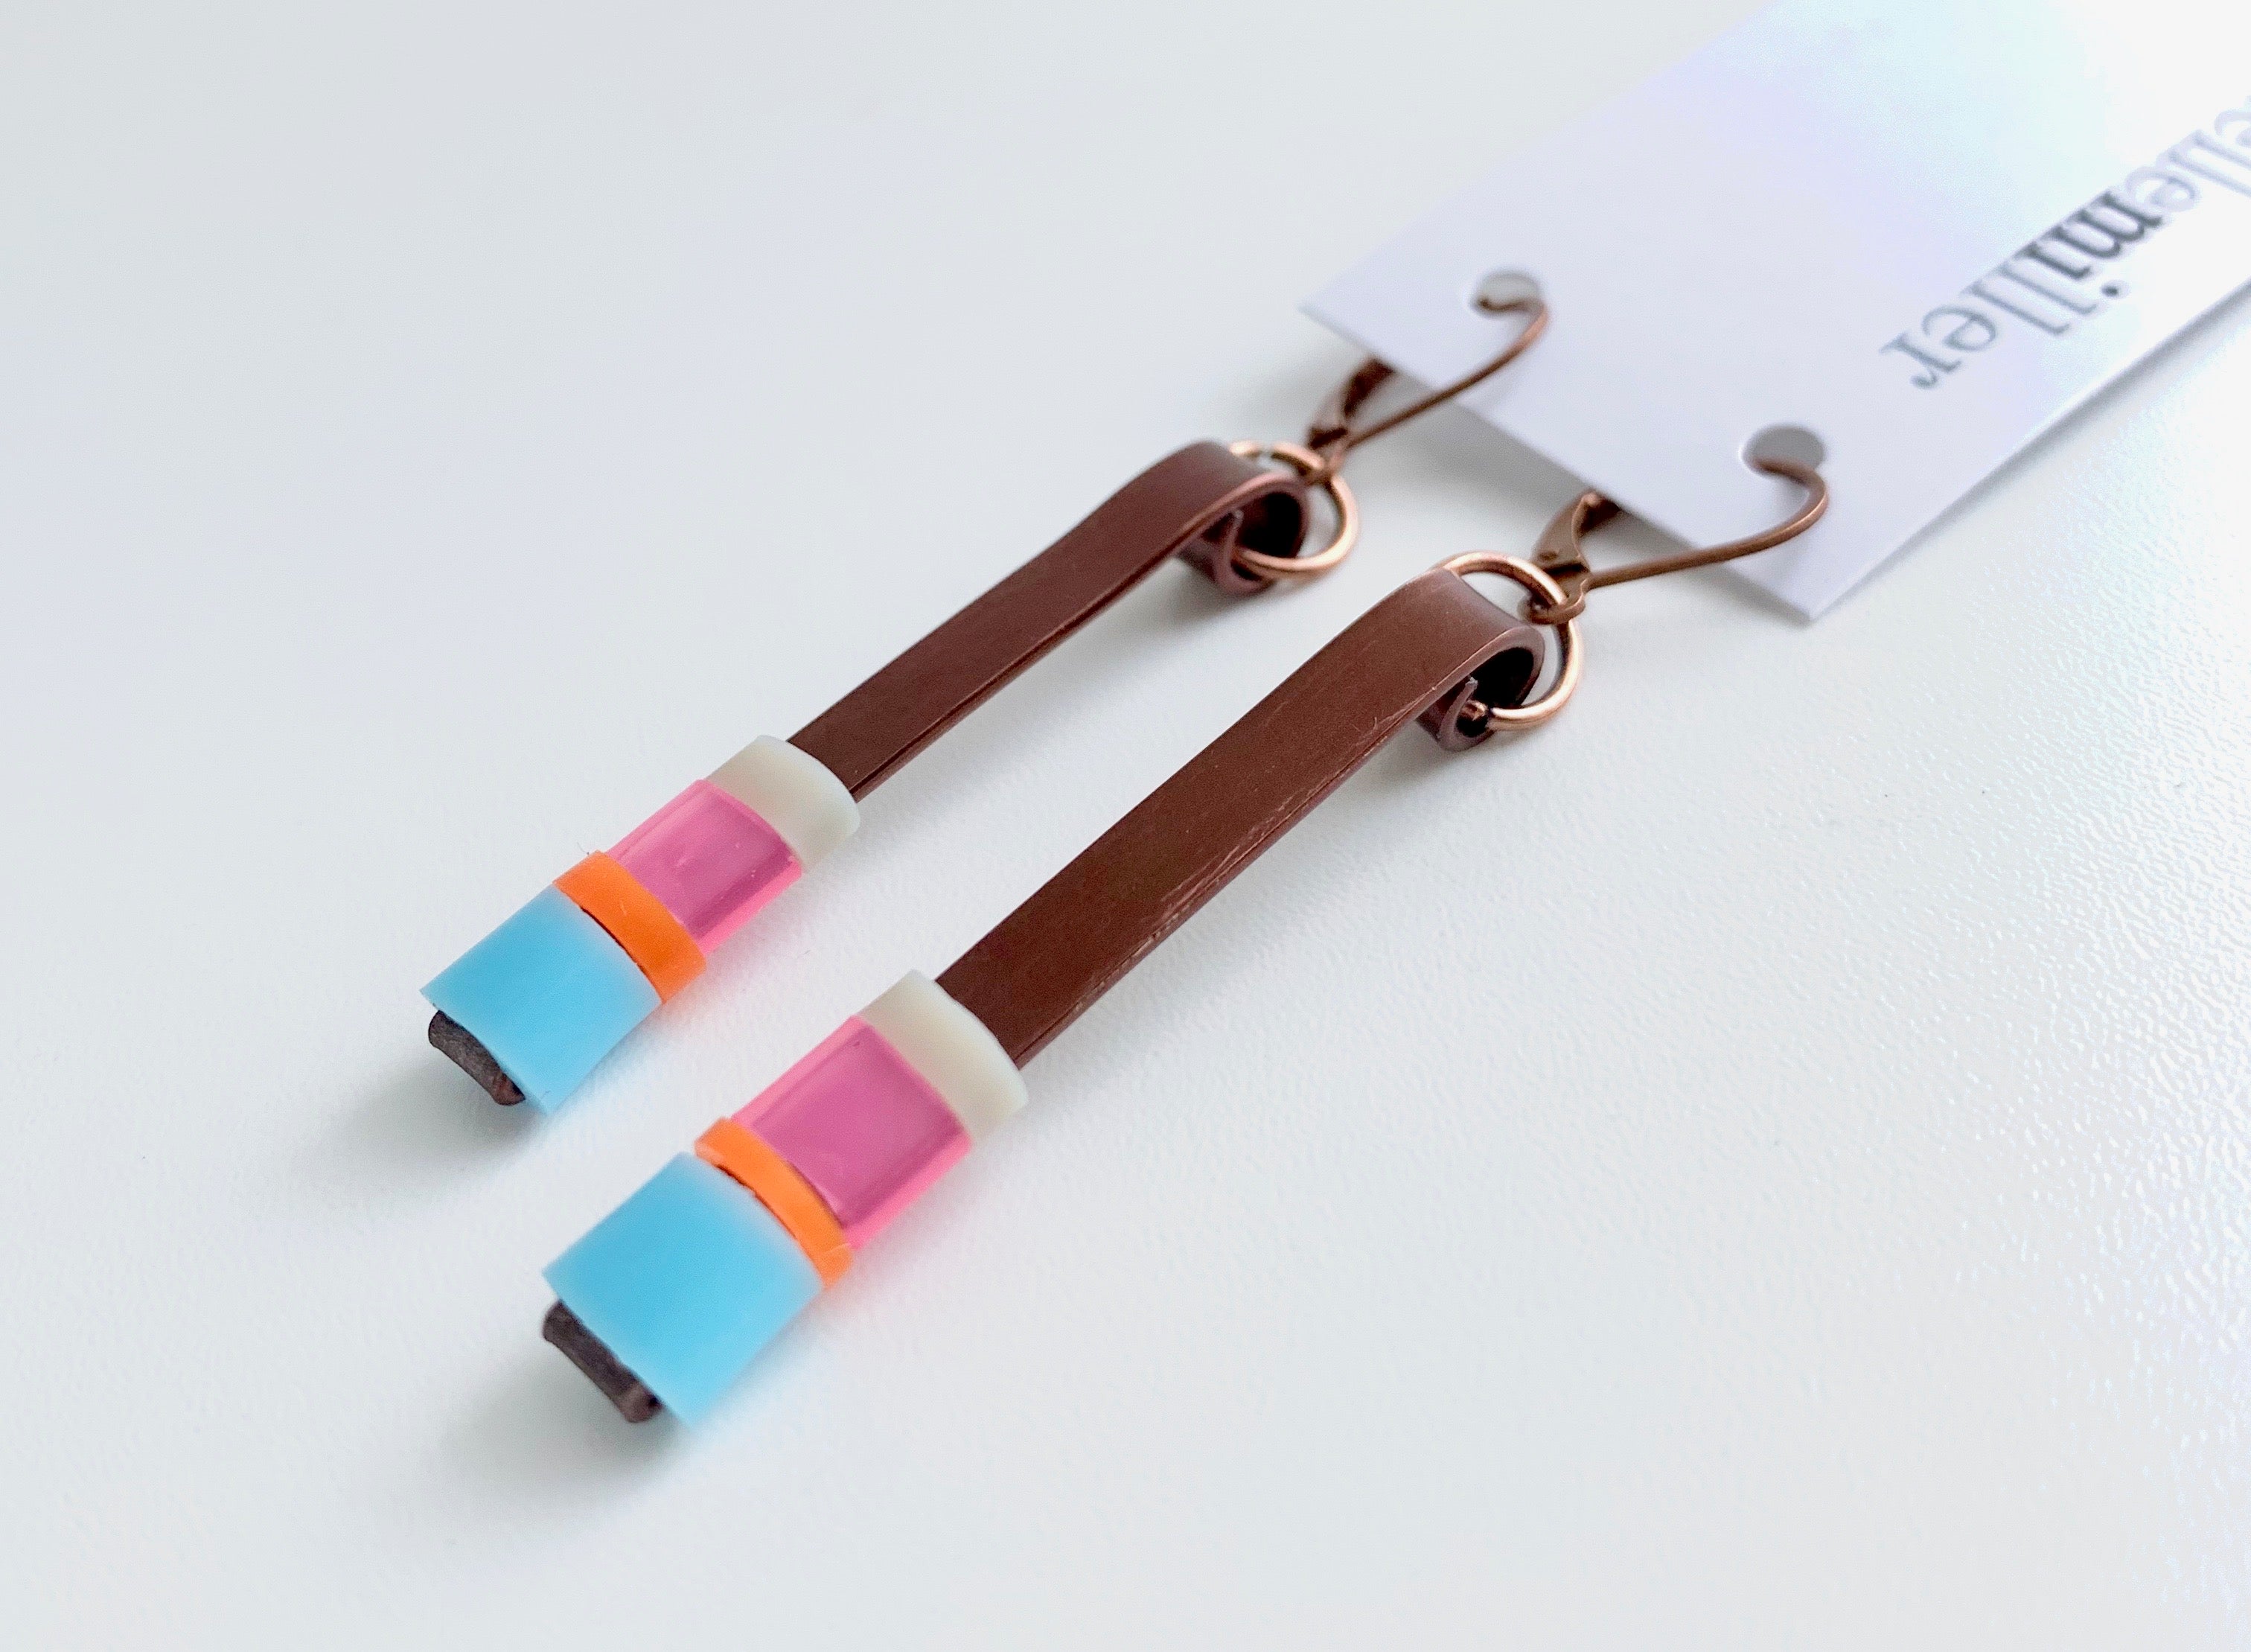 Matchstick earrings in bronze coloured aluminum wire with light blue, pink, beige and orange coloured silicone tubing. These hang 4.5cm in length.